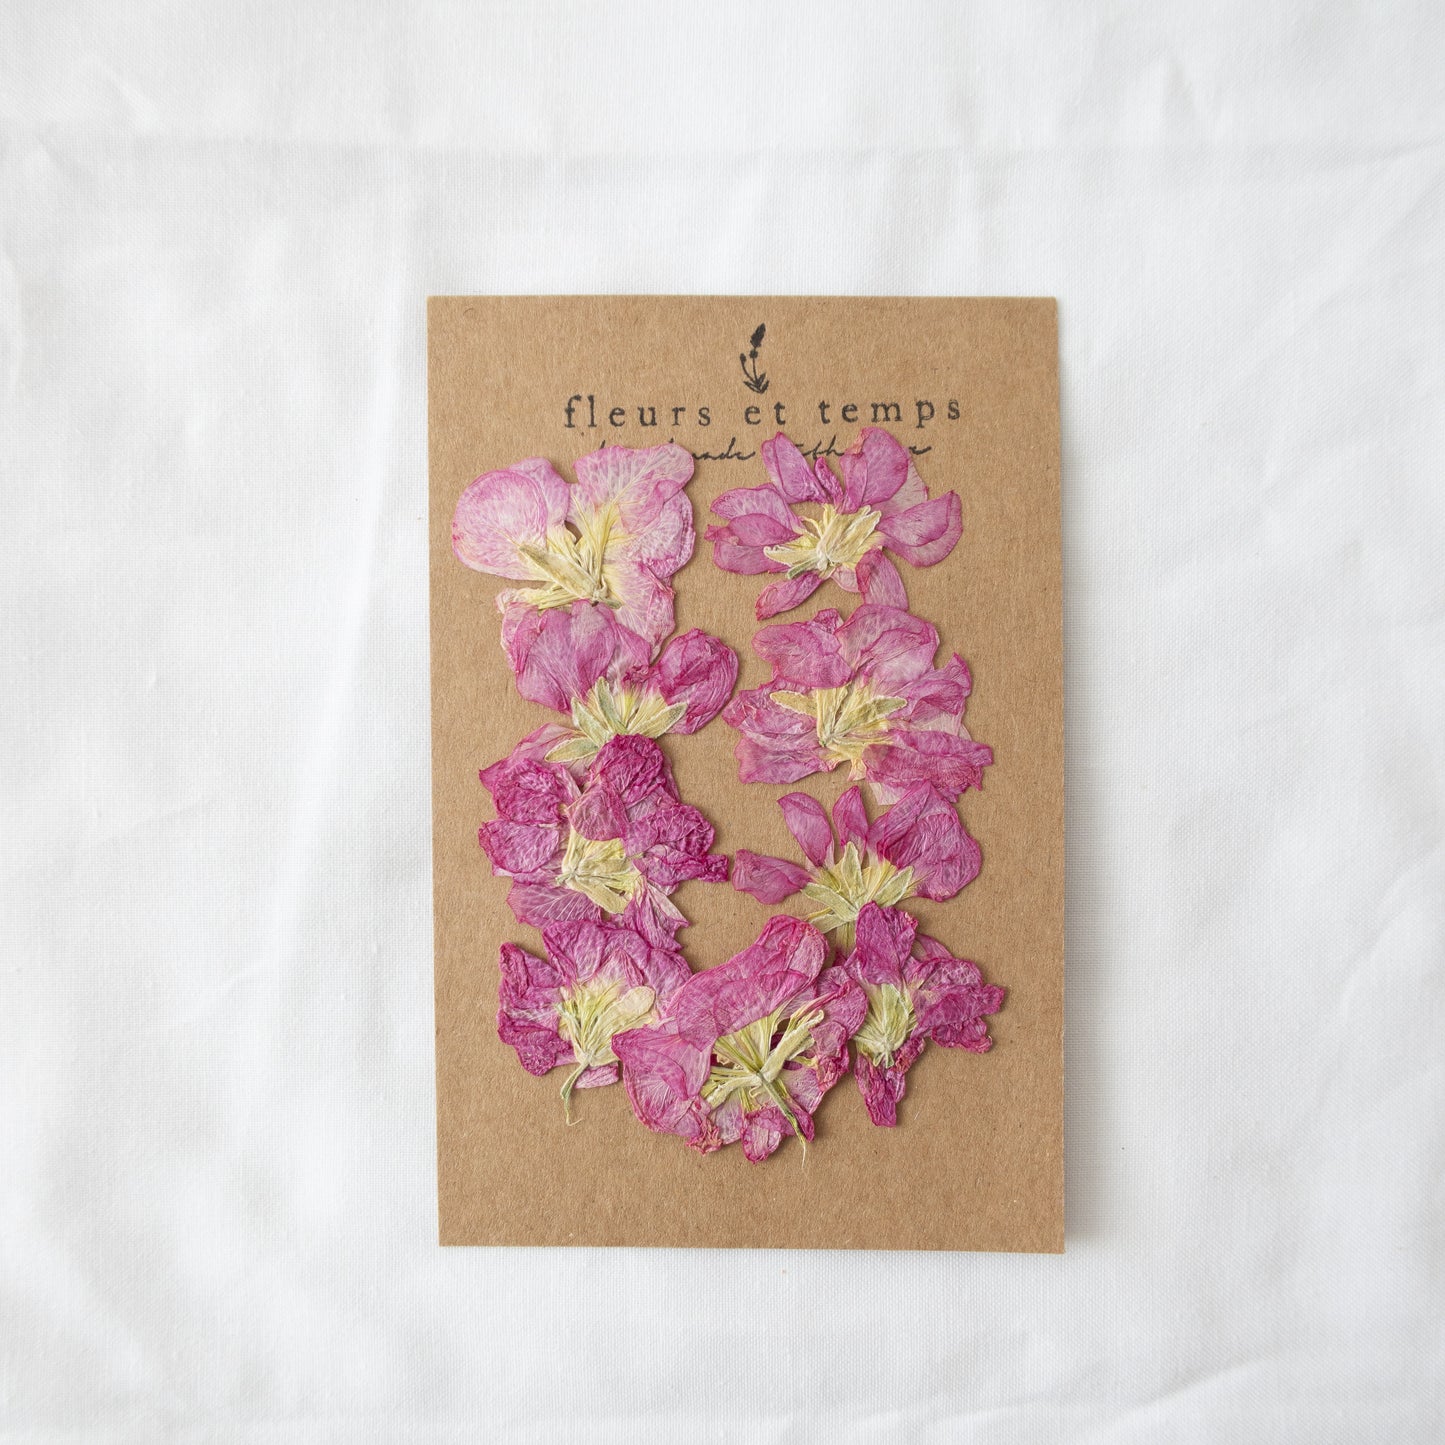 Pressed Pink Stock Flowers